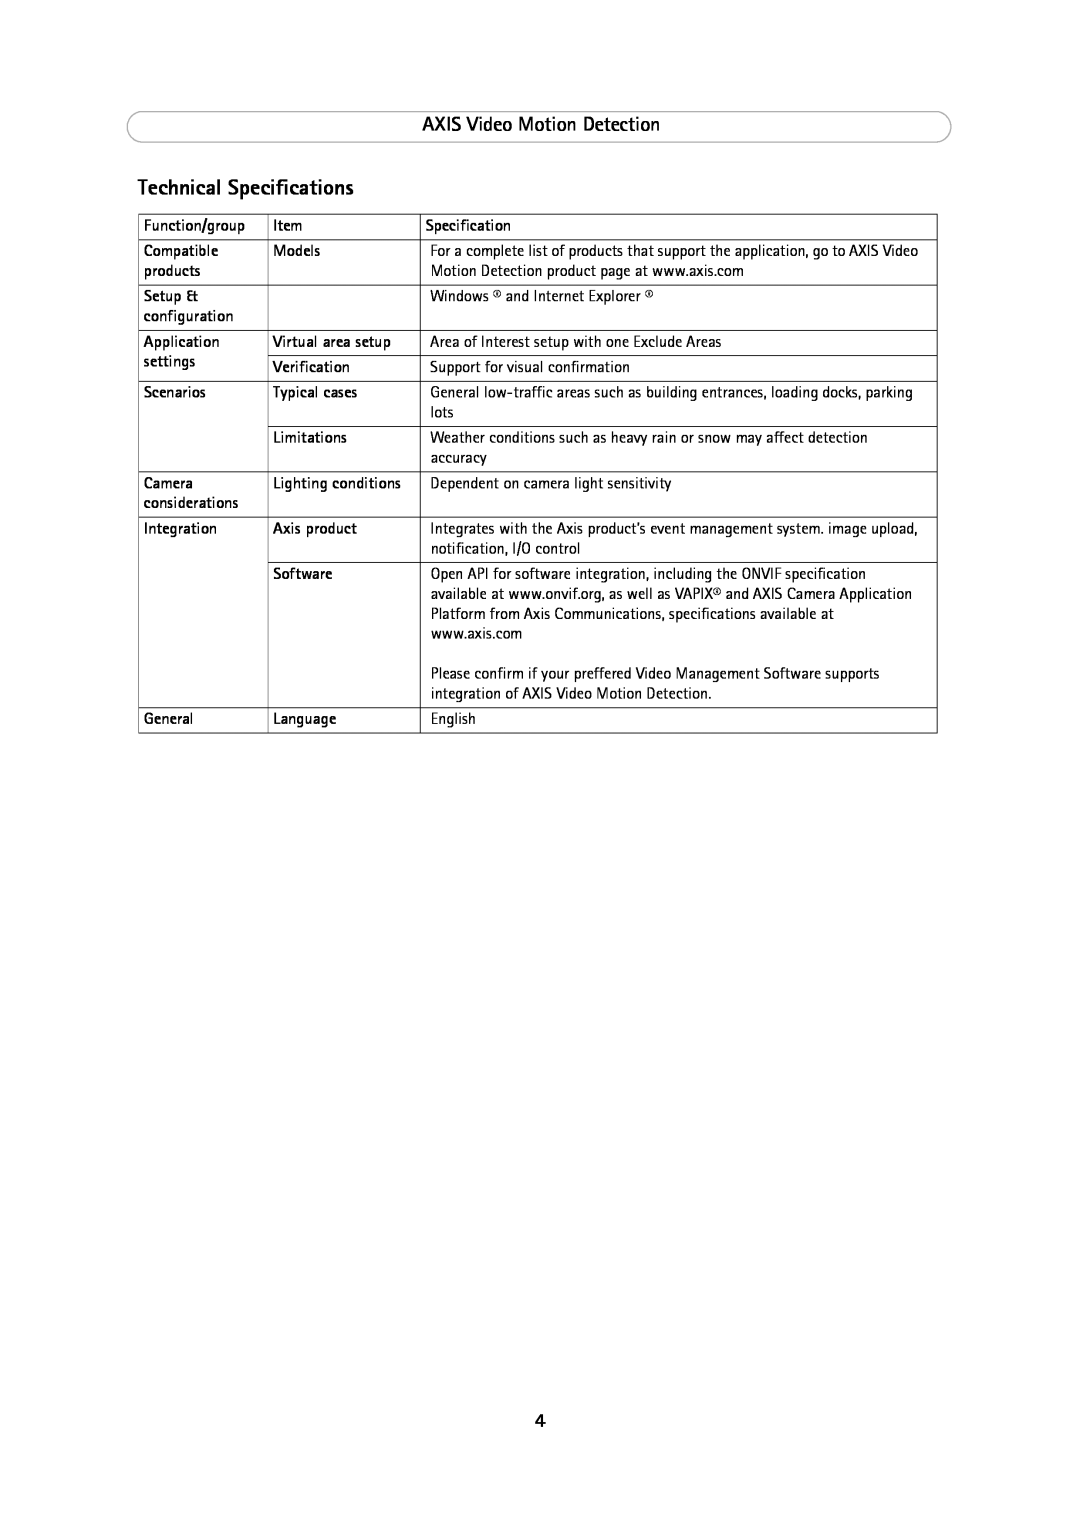 Axis Communications 2 manual Technical Specifications, AXIS Video Motion Detection 